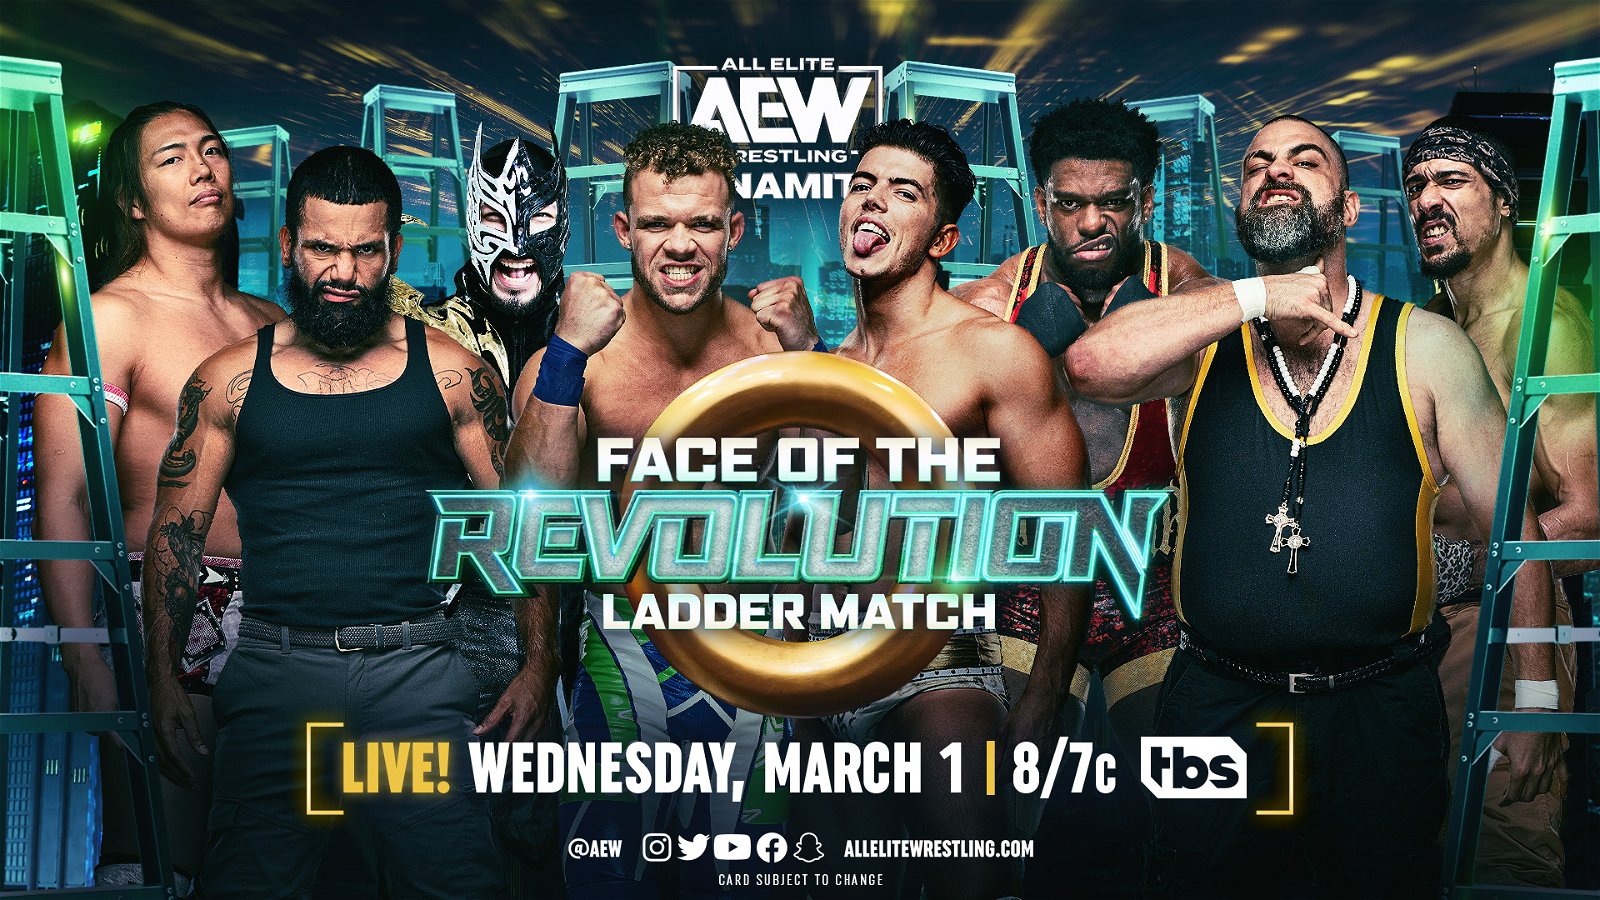 Who Won The AEW Face Of The Revolution Ladder Match